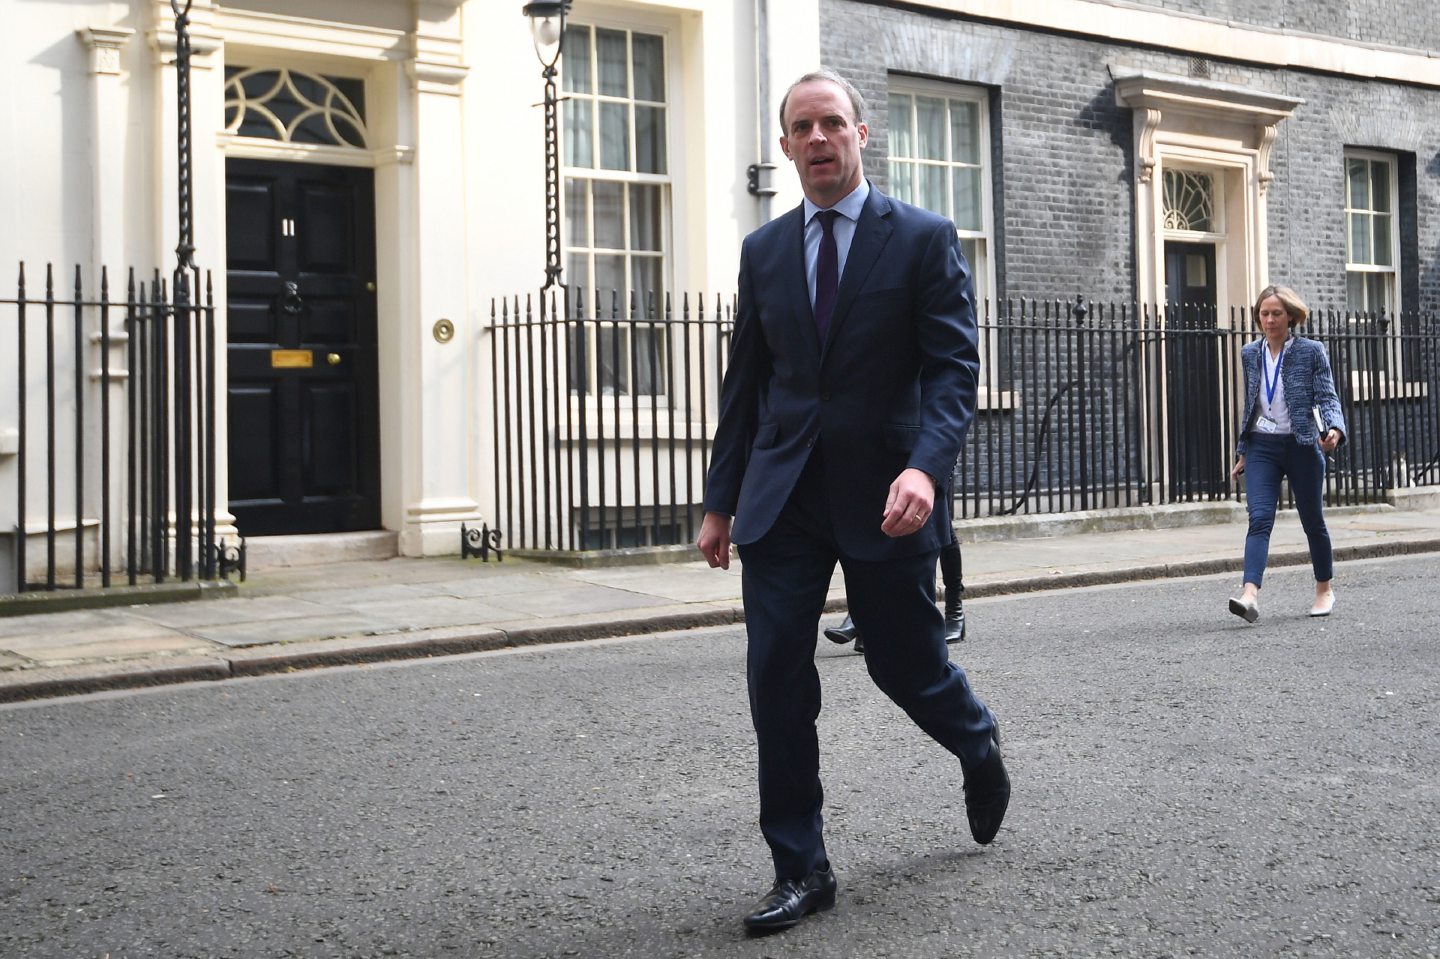 Dominic Raab outside Number 10